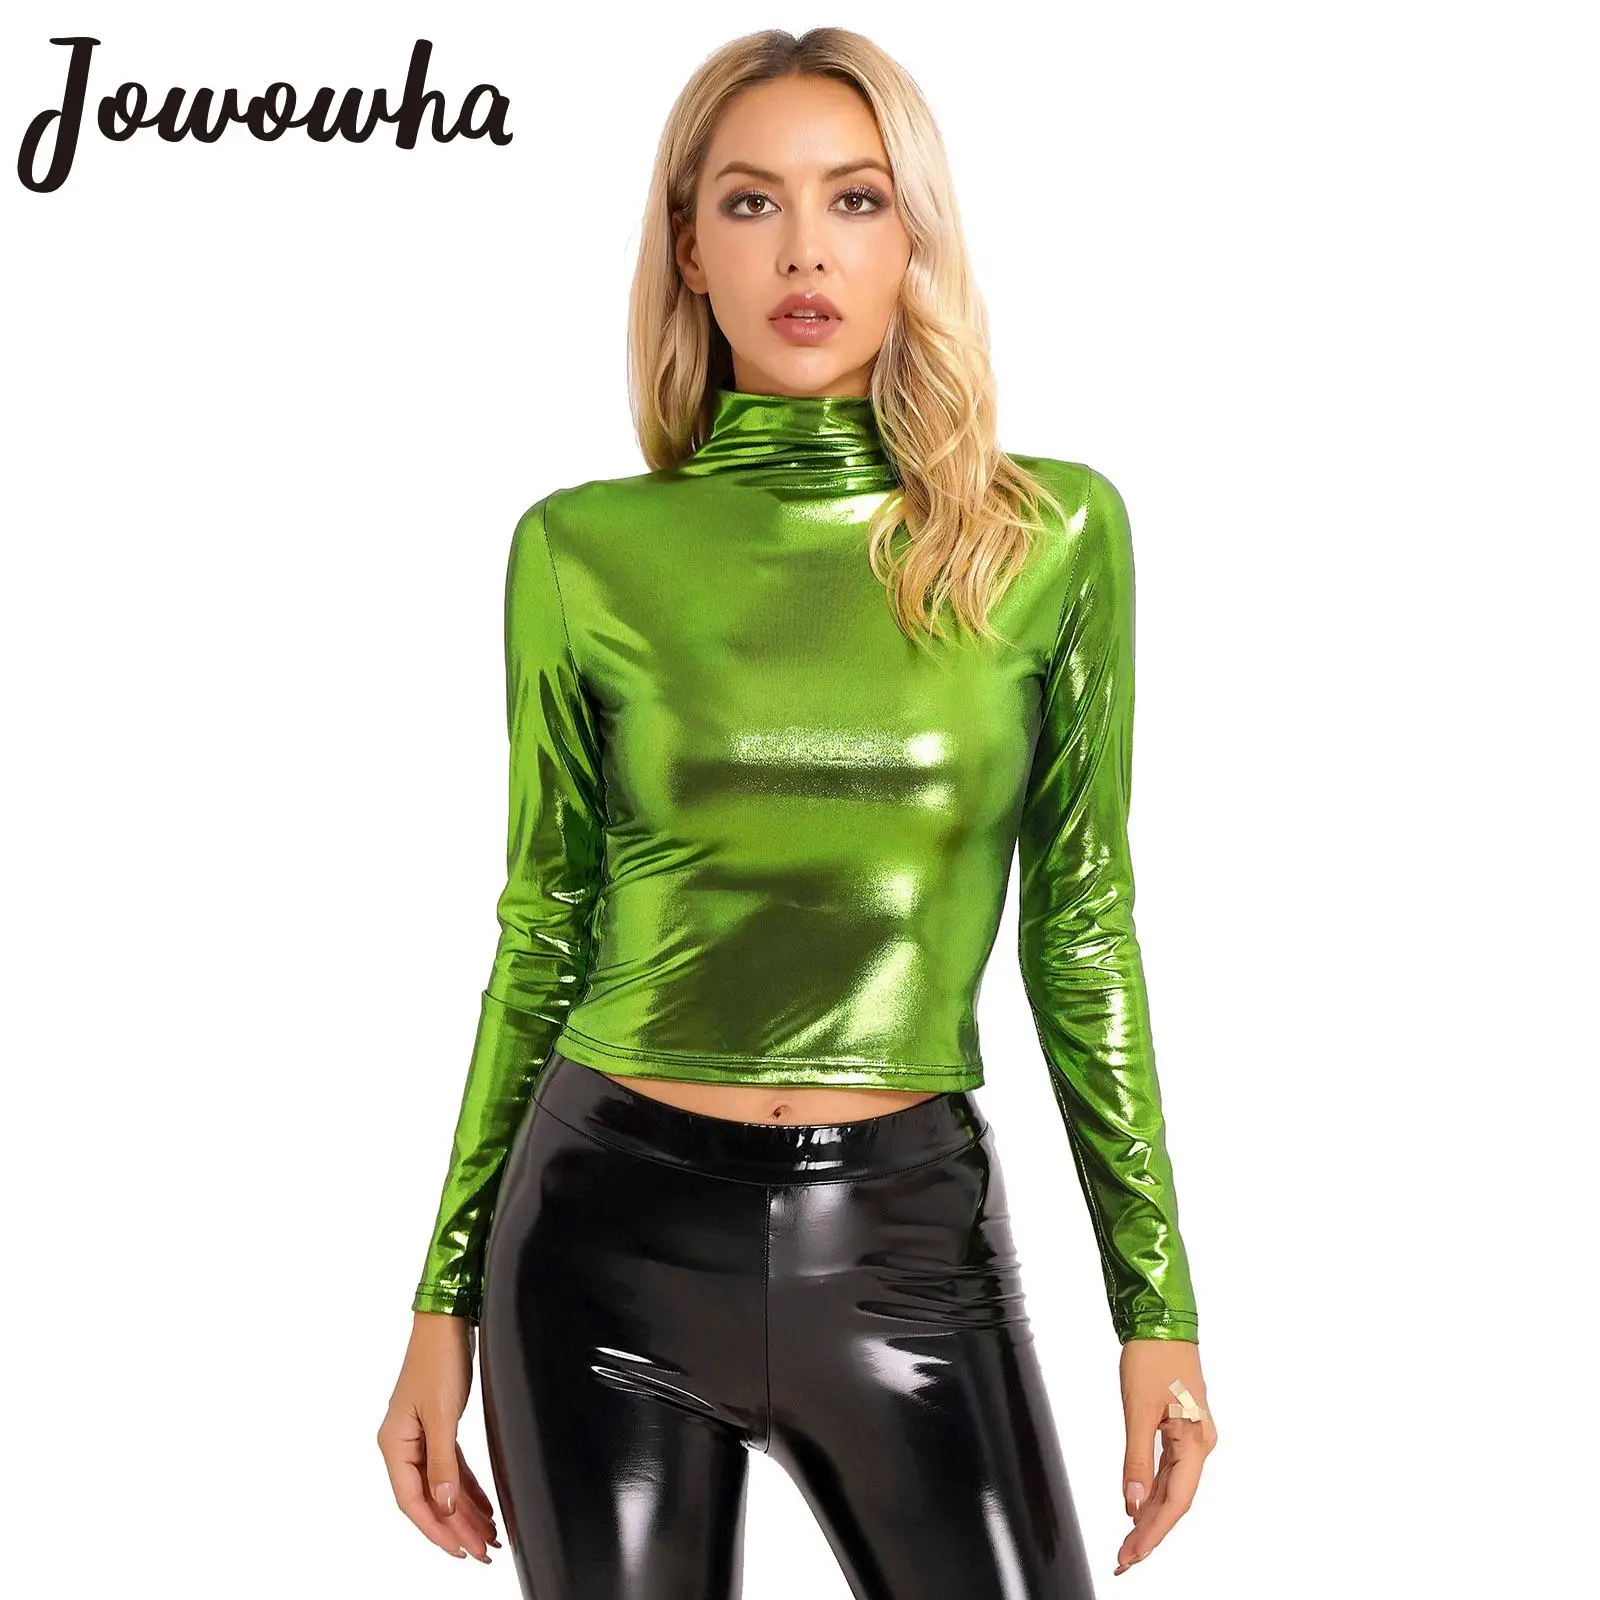 

Womens Metallic Long Sleeve T-Shirt Fashion Shiny Top Slim Fit Mock Neck Tops Cocktail Dancing Party Club Music Festival Costume